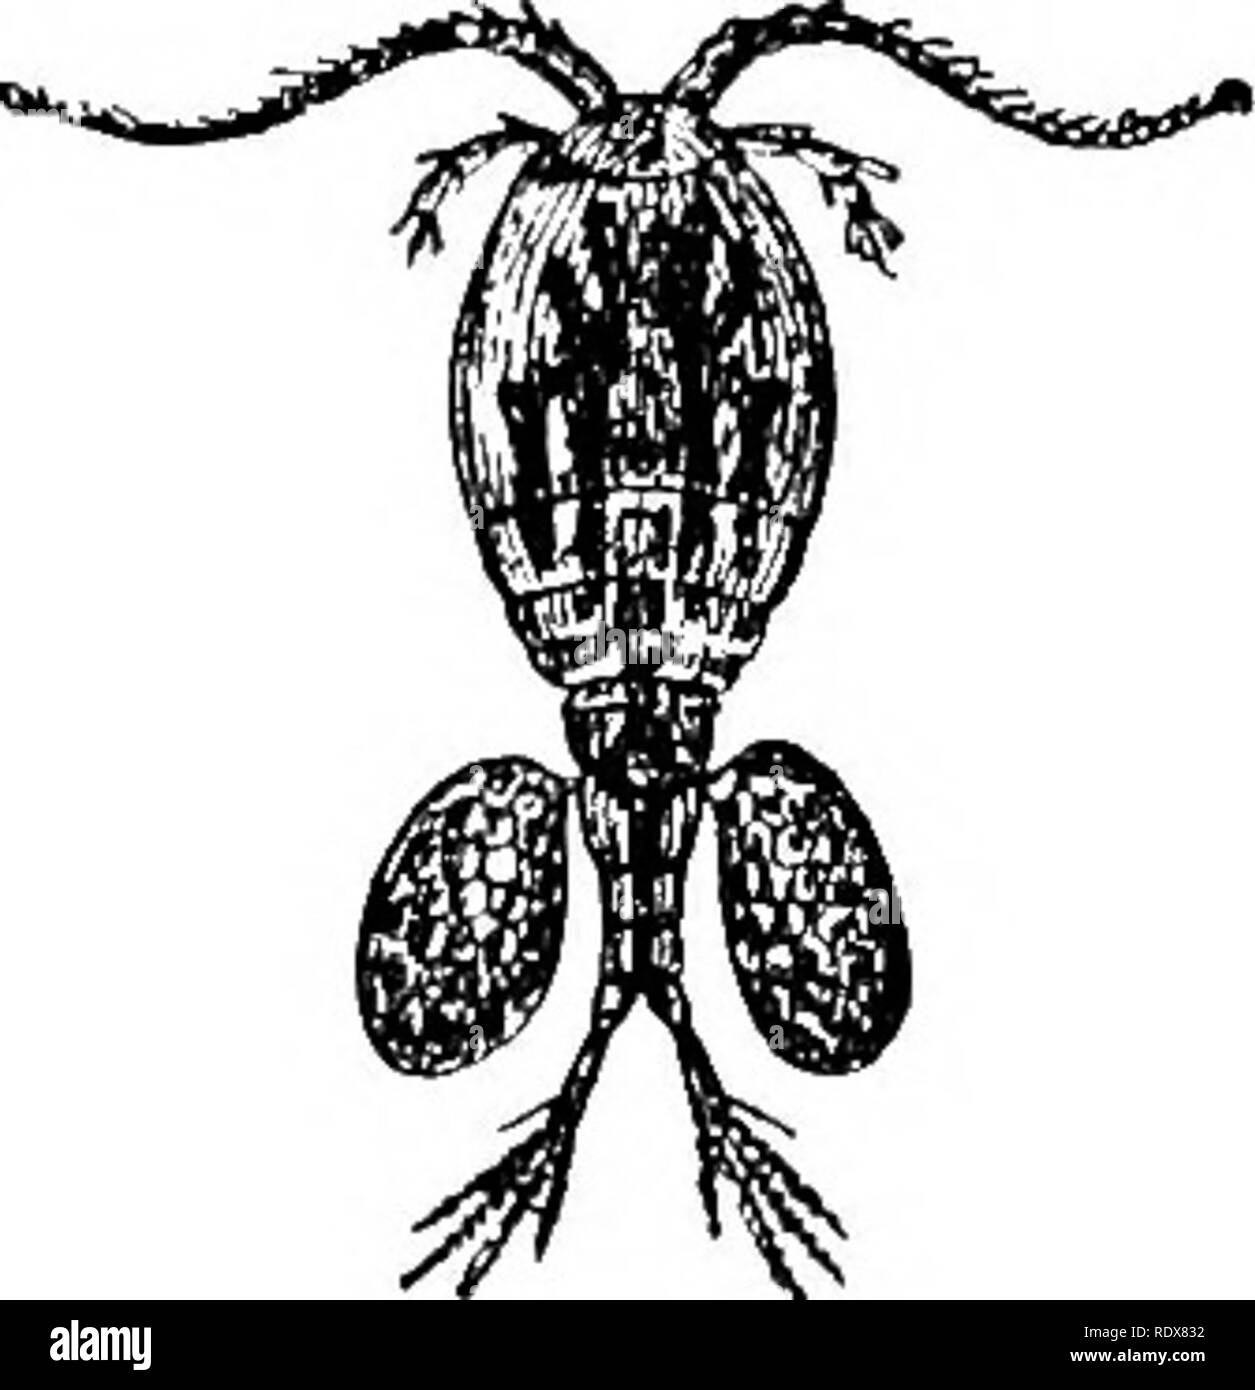 . Natural history. Zoology. 532 CRUSTACEA—ORDERS COPEPODA AND CIRRIPEDIA. Drqjihniidd', or water-fleas are small Crndacea whicli abound in fresh water. They are of a compressed oval form, and are partly covered by a thin, trans- parent bivalve shell. The first pair of aiitennce is small, but the second very large, bifid at the extremity, and set with long hairs, which serve as the principal organs of locomotion. The eyes are fused into one large one, near which is often another small one. They have from four to six pairs of swimming legs. They are very favourite objects with microscopists, bei Stock Photo